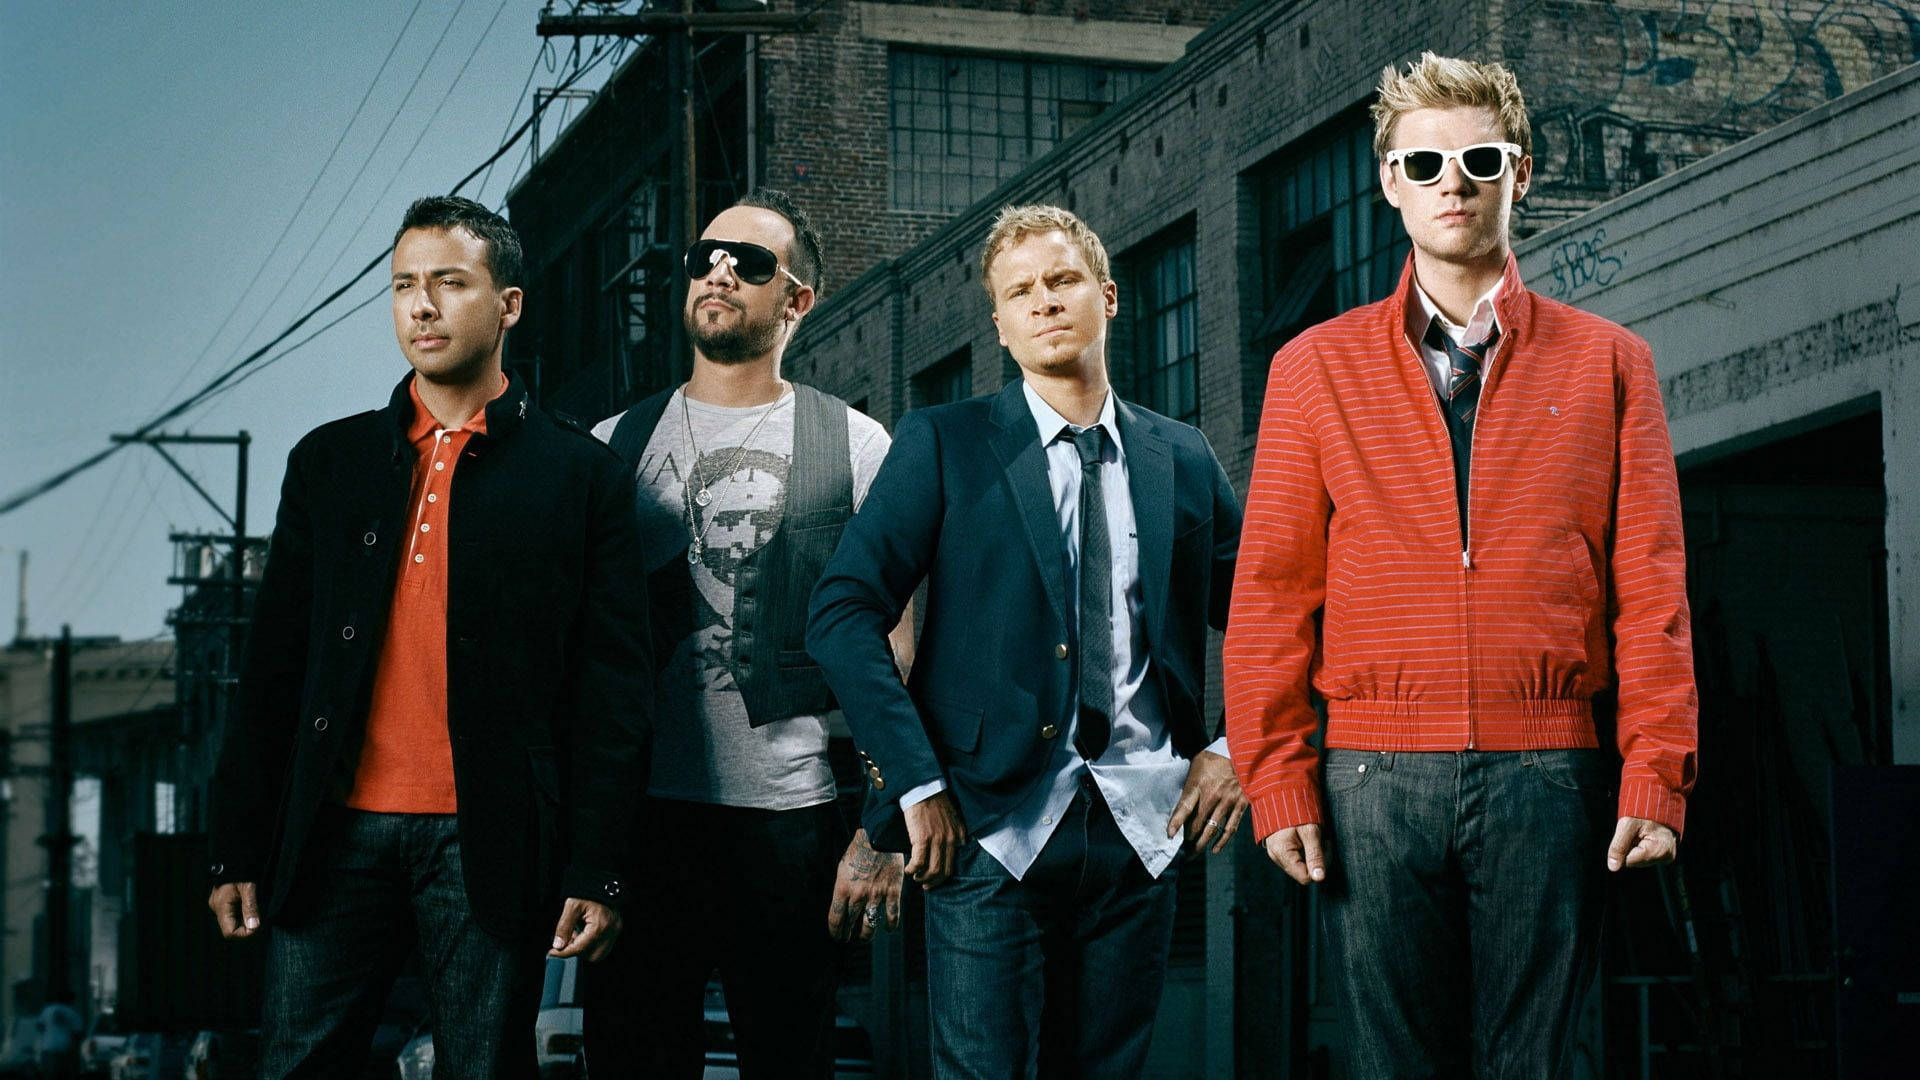 Group Backstreet Boys In Front Of Building Picture